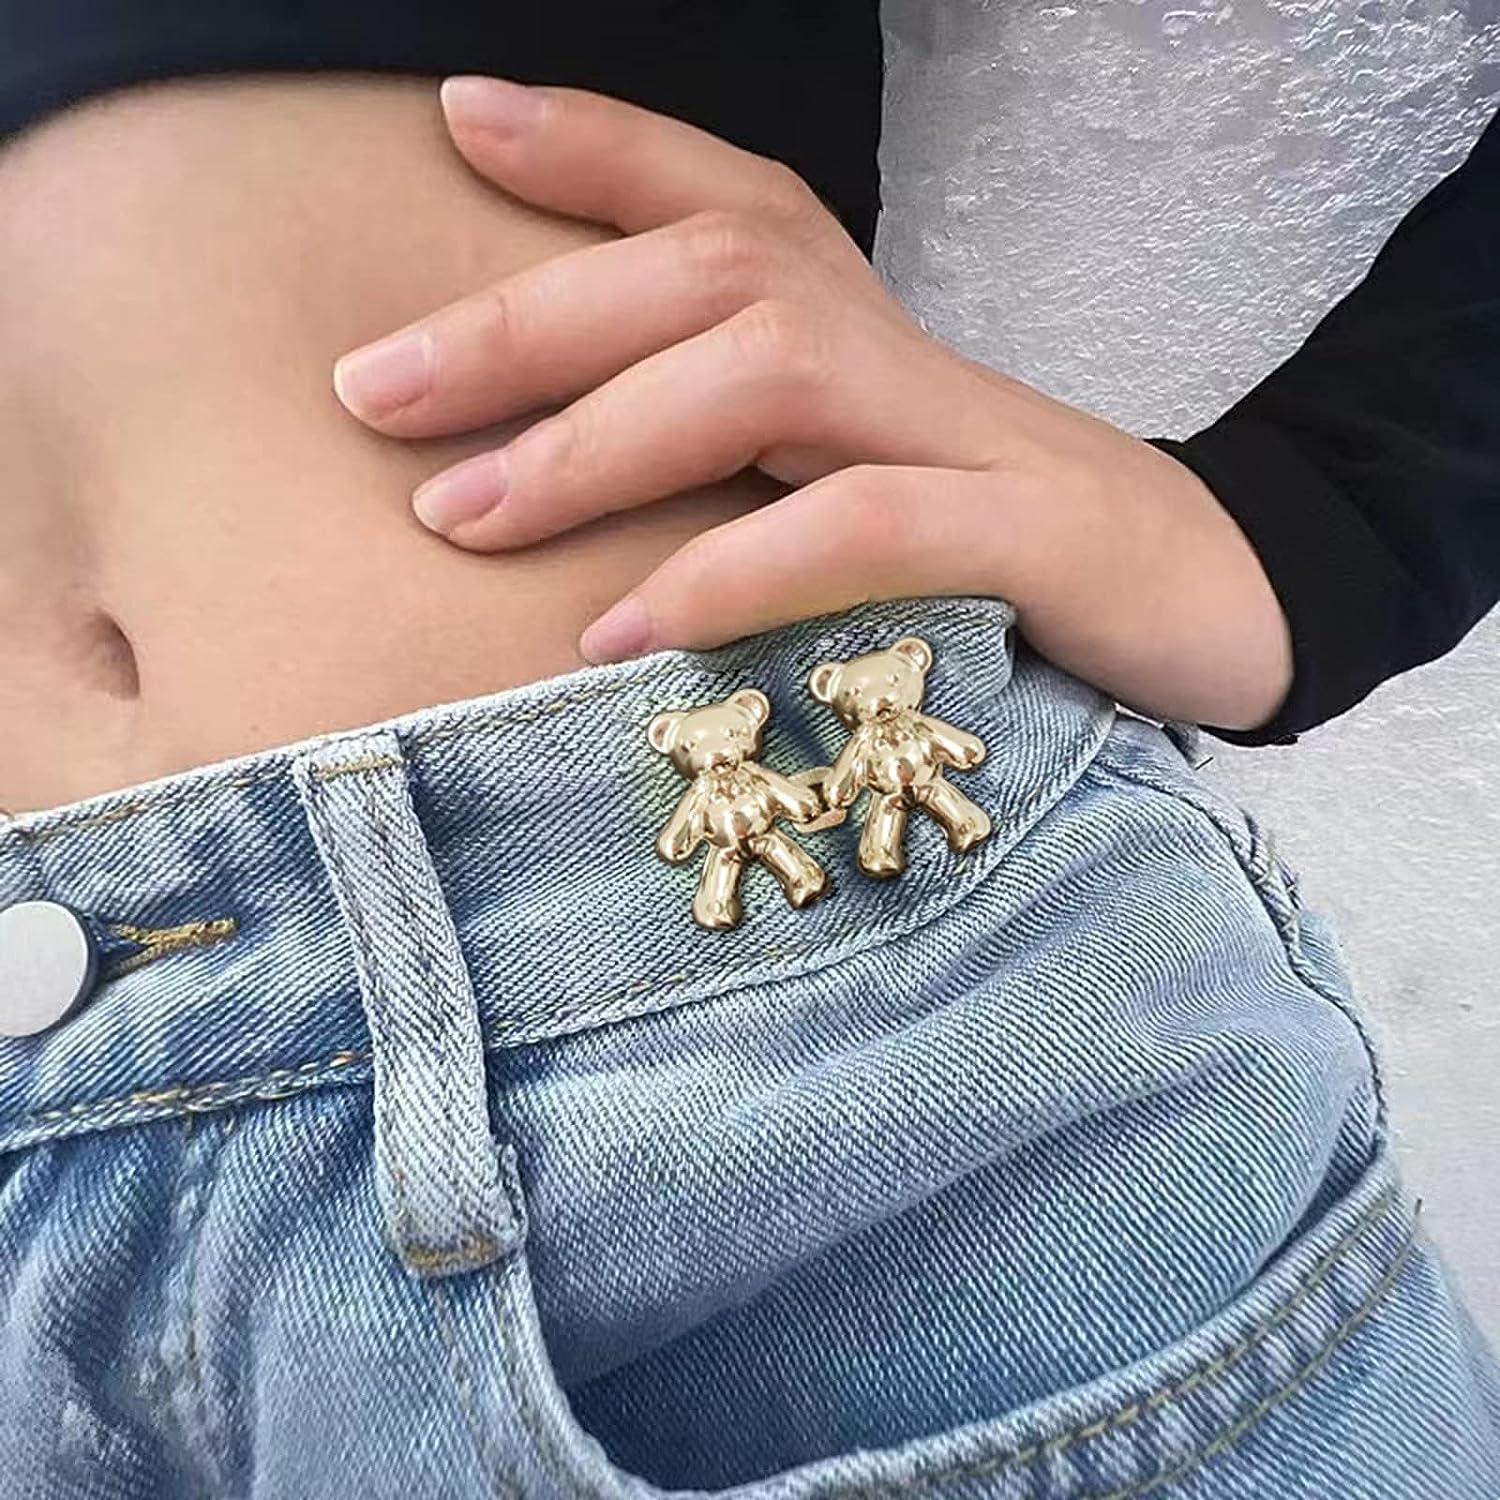 Bear Button Pins for Jean,Jean Buttons for Loose Jeans,No Sew Button  Extenders for Jeans,Easy to Instant Reduce Too Loose Pants Waist,2  Sets(Gold)